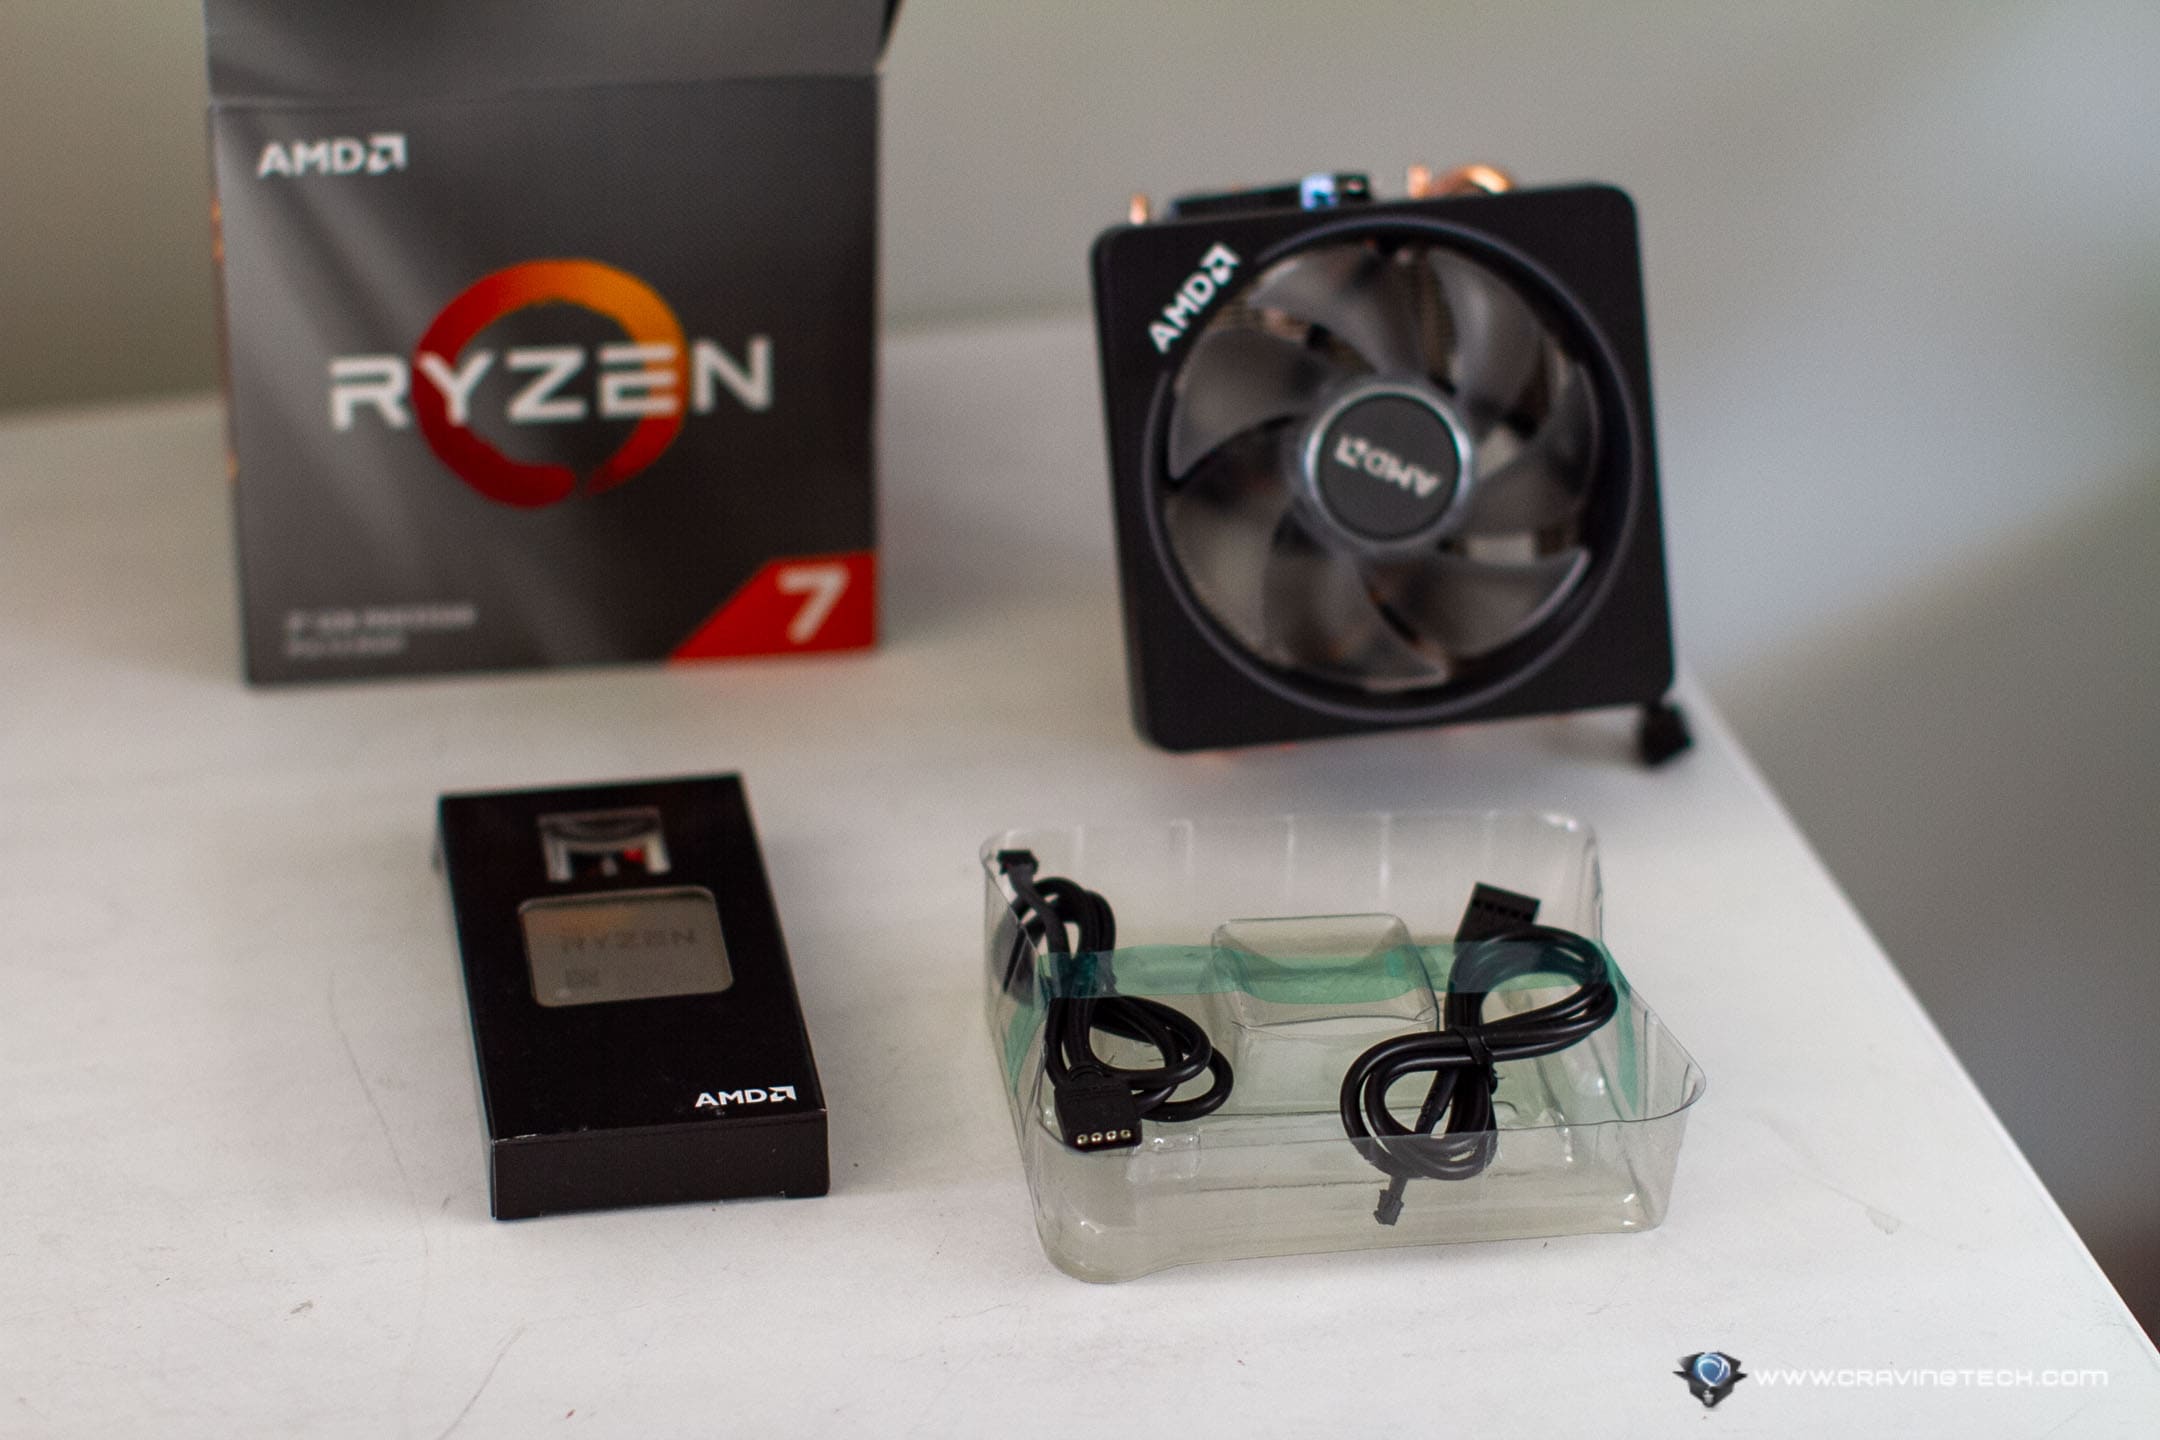 4K Video Editing, Gaming, and Overclocking with my new AMD Ryzen 7 3800X build